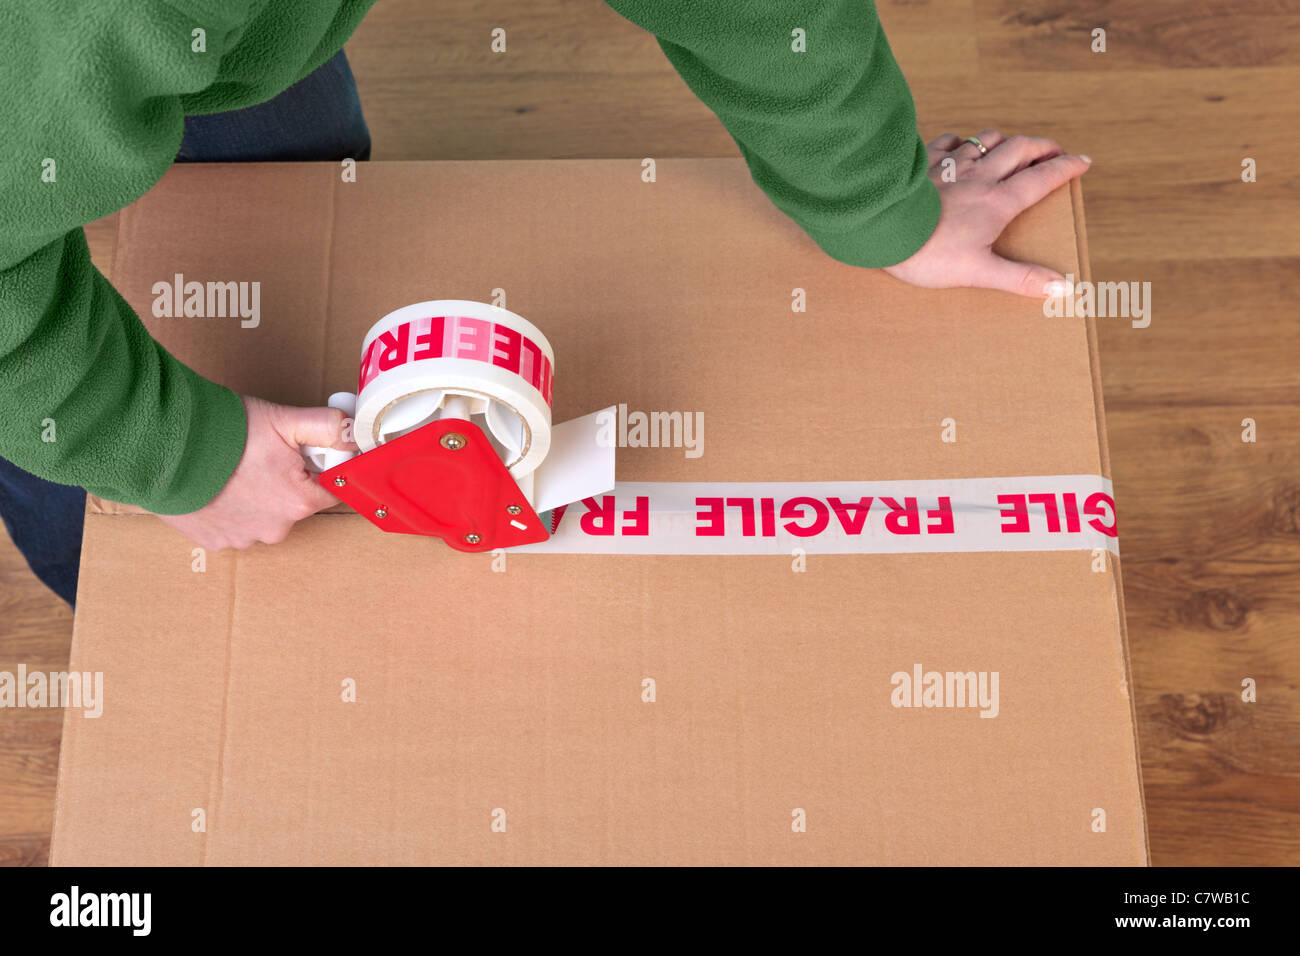 Photo of a womans hands taping up a cardboard box, can be used for removal or logistics related themes. Stock Photo